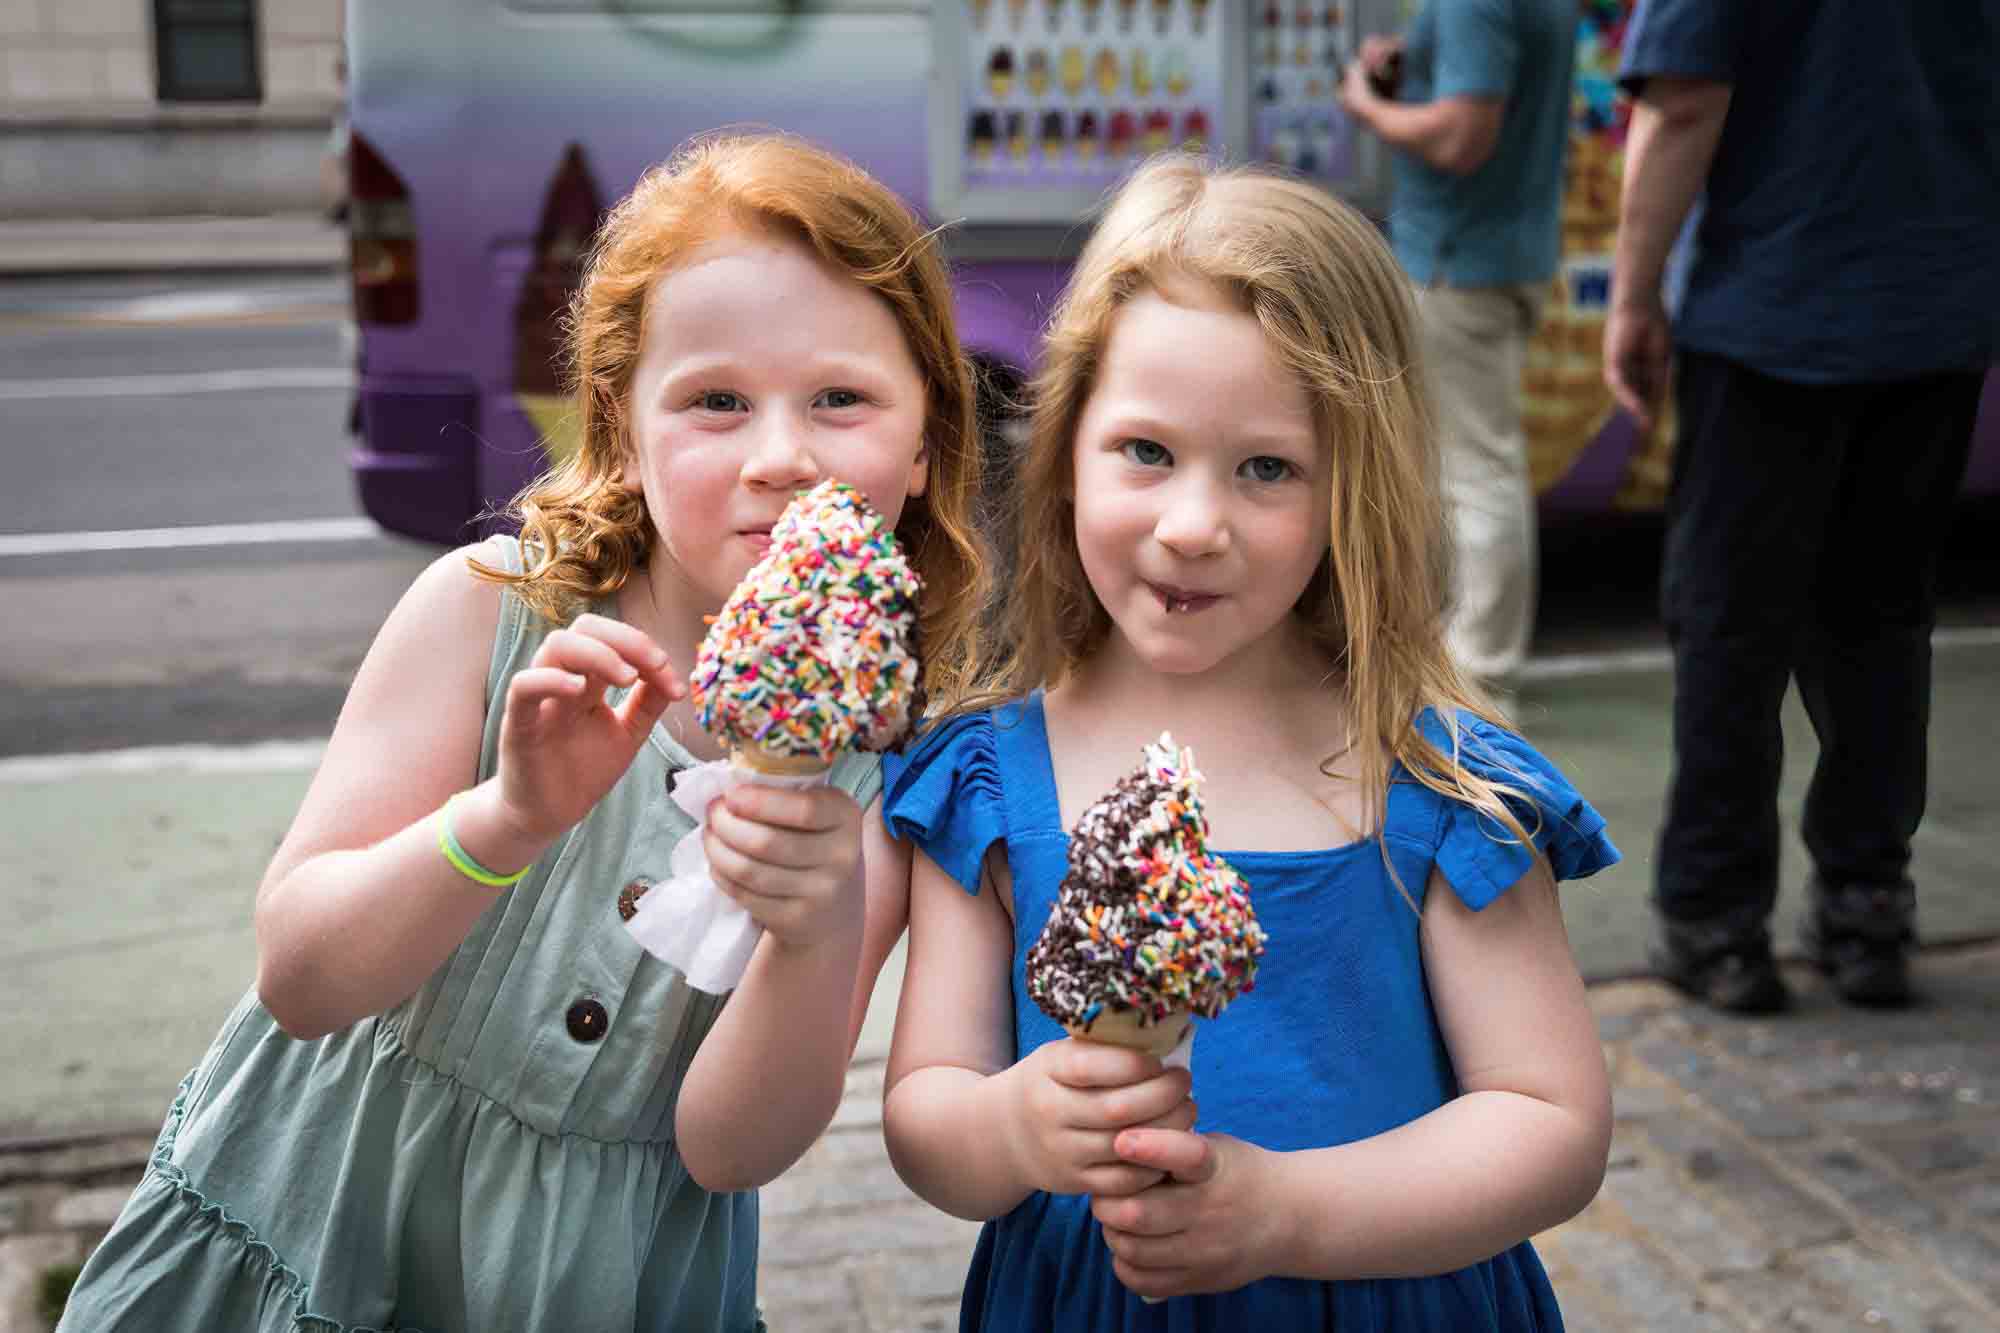 Two little girls holding ice cream cones covered in colorful sprinkles